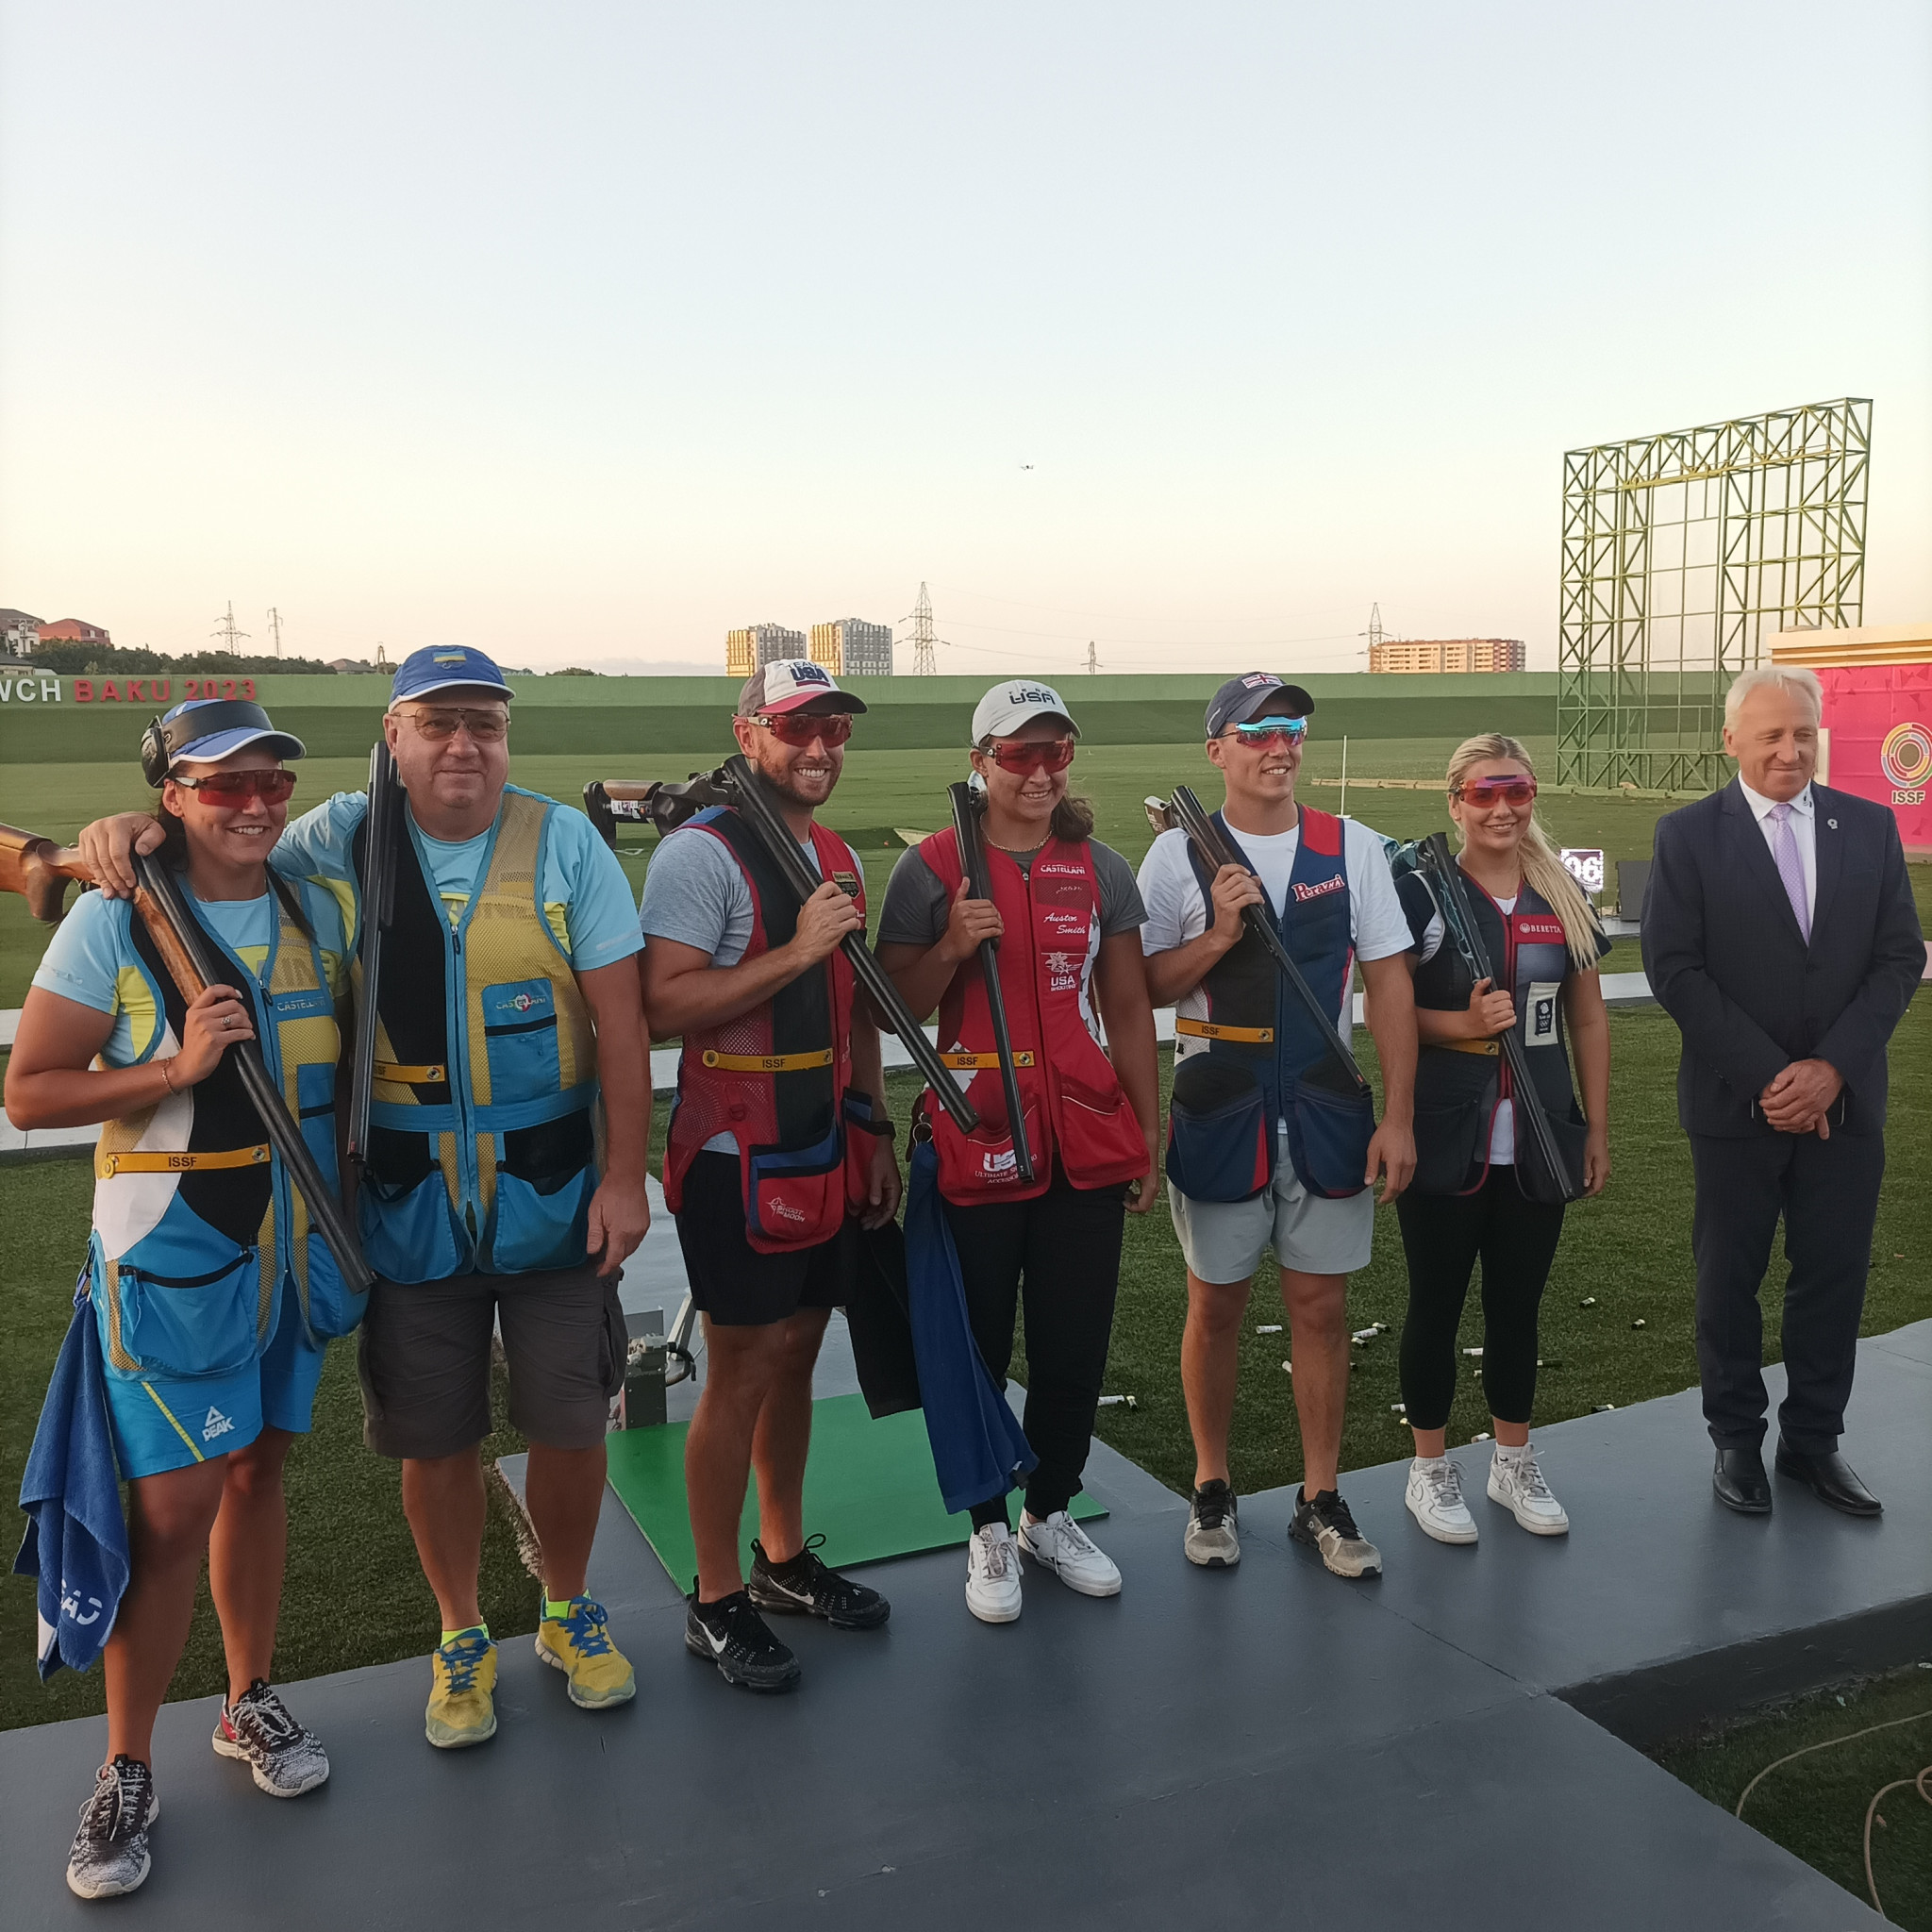 The mixed team skeet will be included for the first time at the Paris 2024 Olympics ©ITG